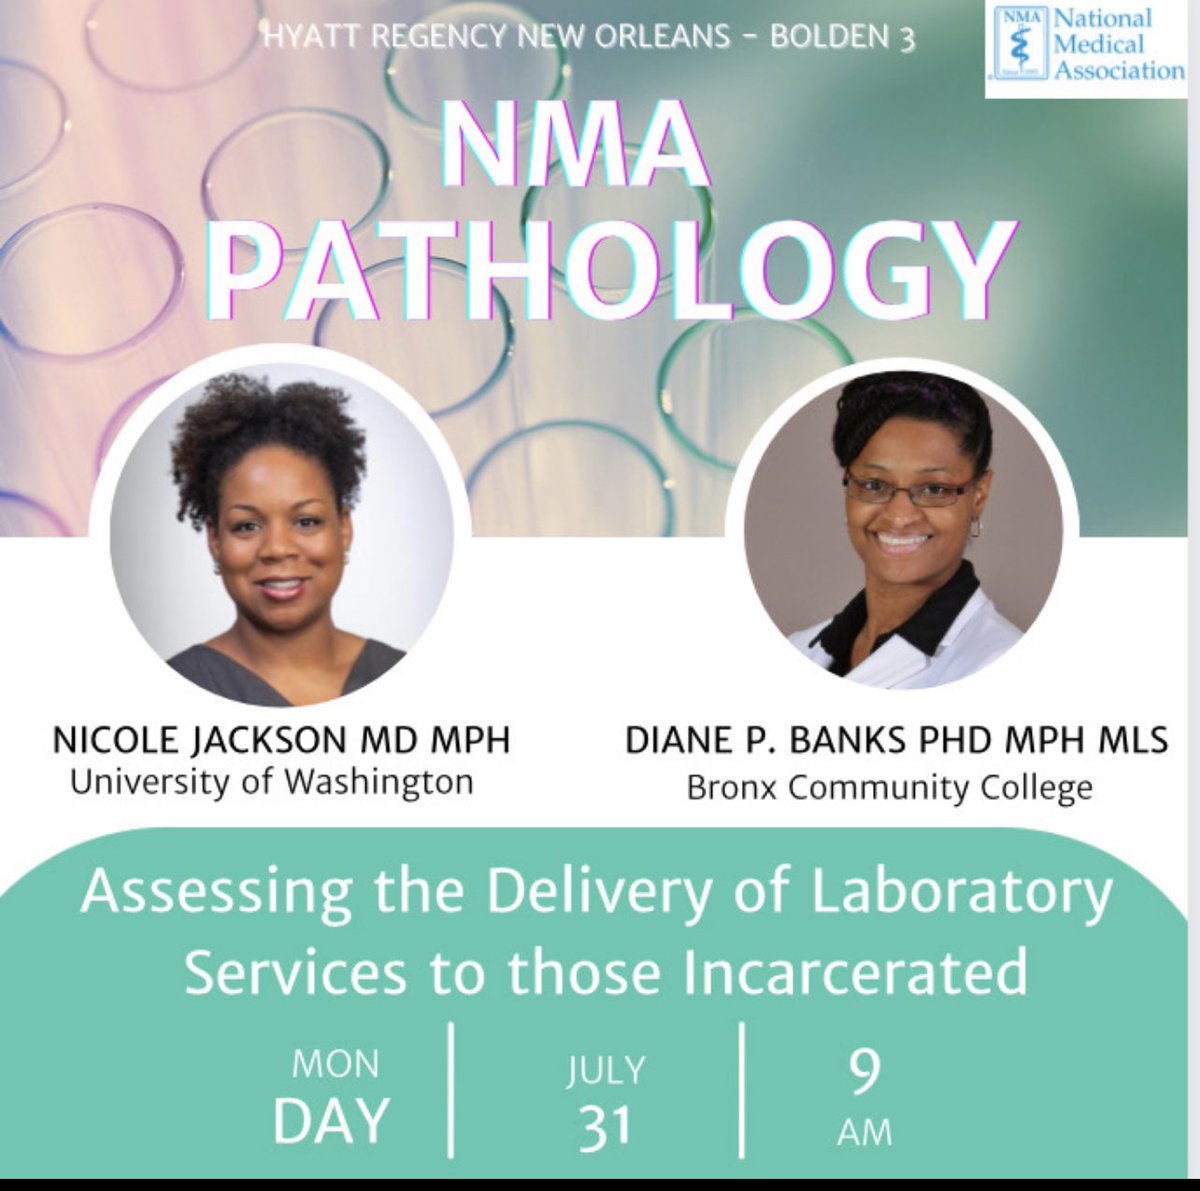 Meet the speakers! Dr. Jackson and Dr. Banks will be part of our Forensic Symposium on the morning of July 31st in New Orleans! #nmapathology #nmanola23